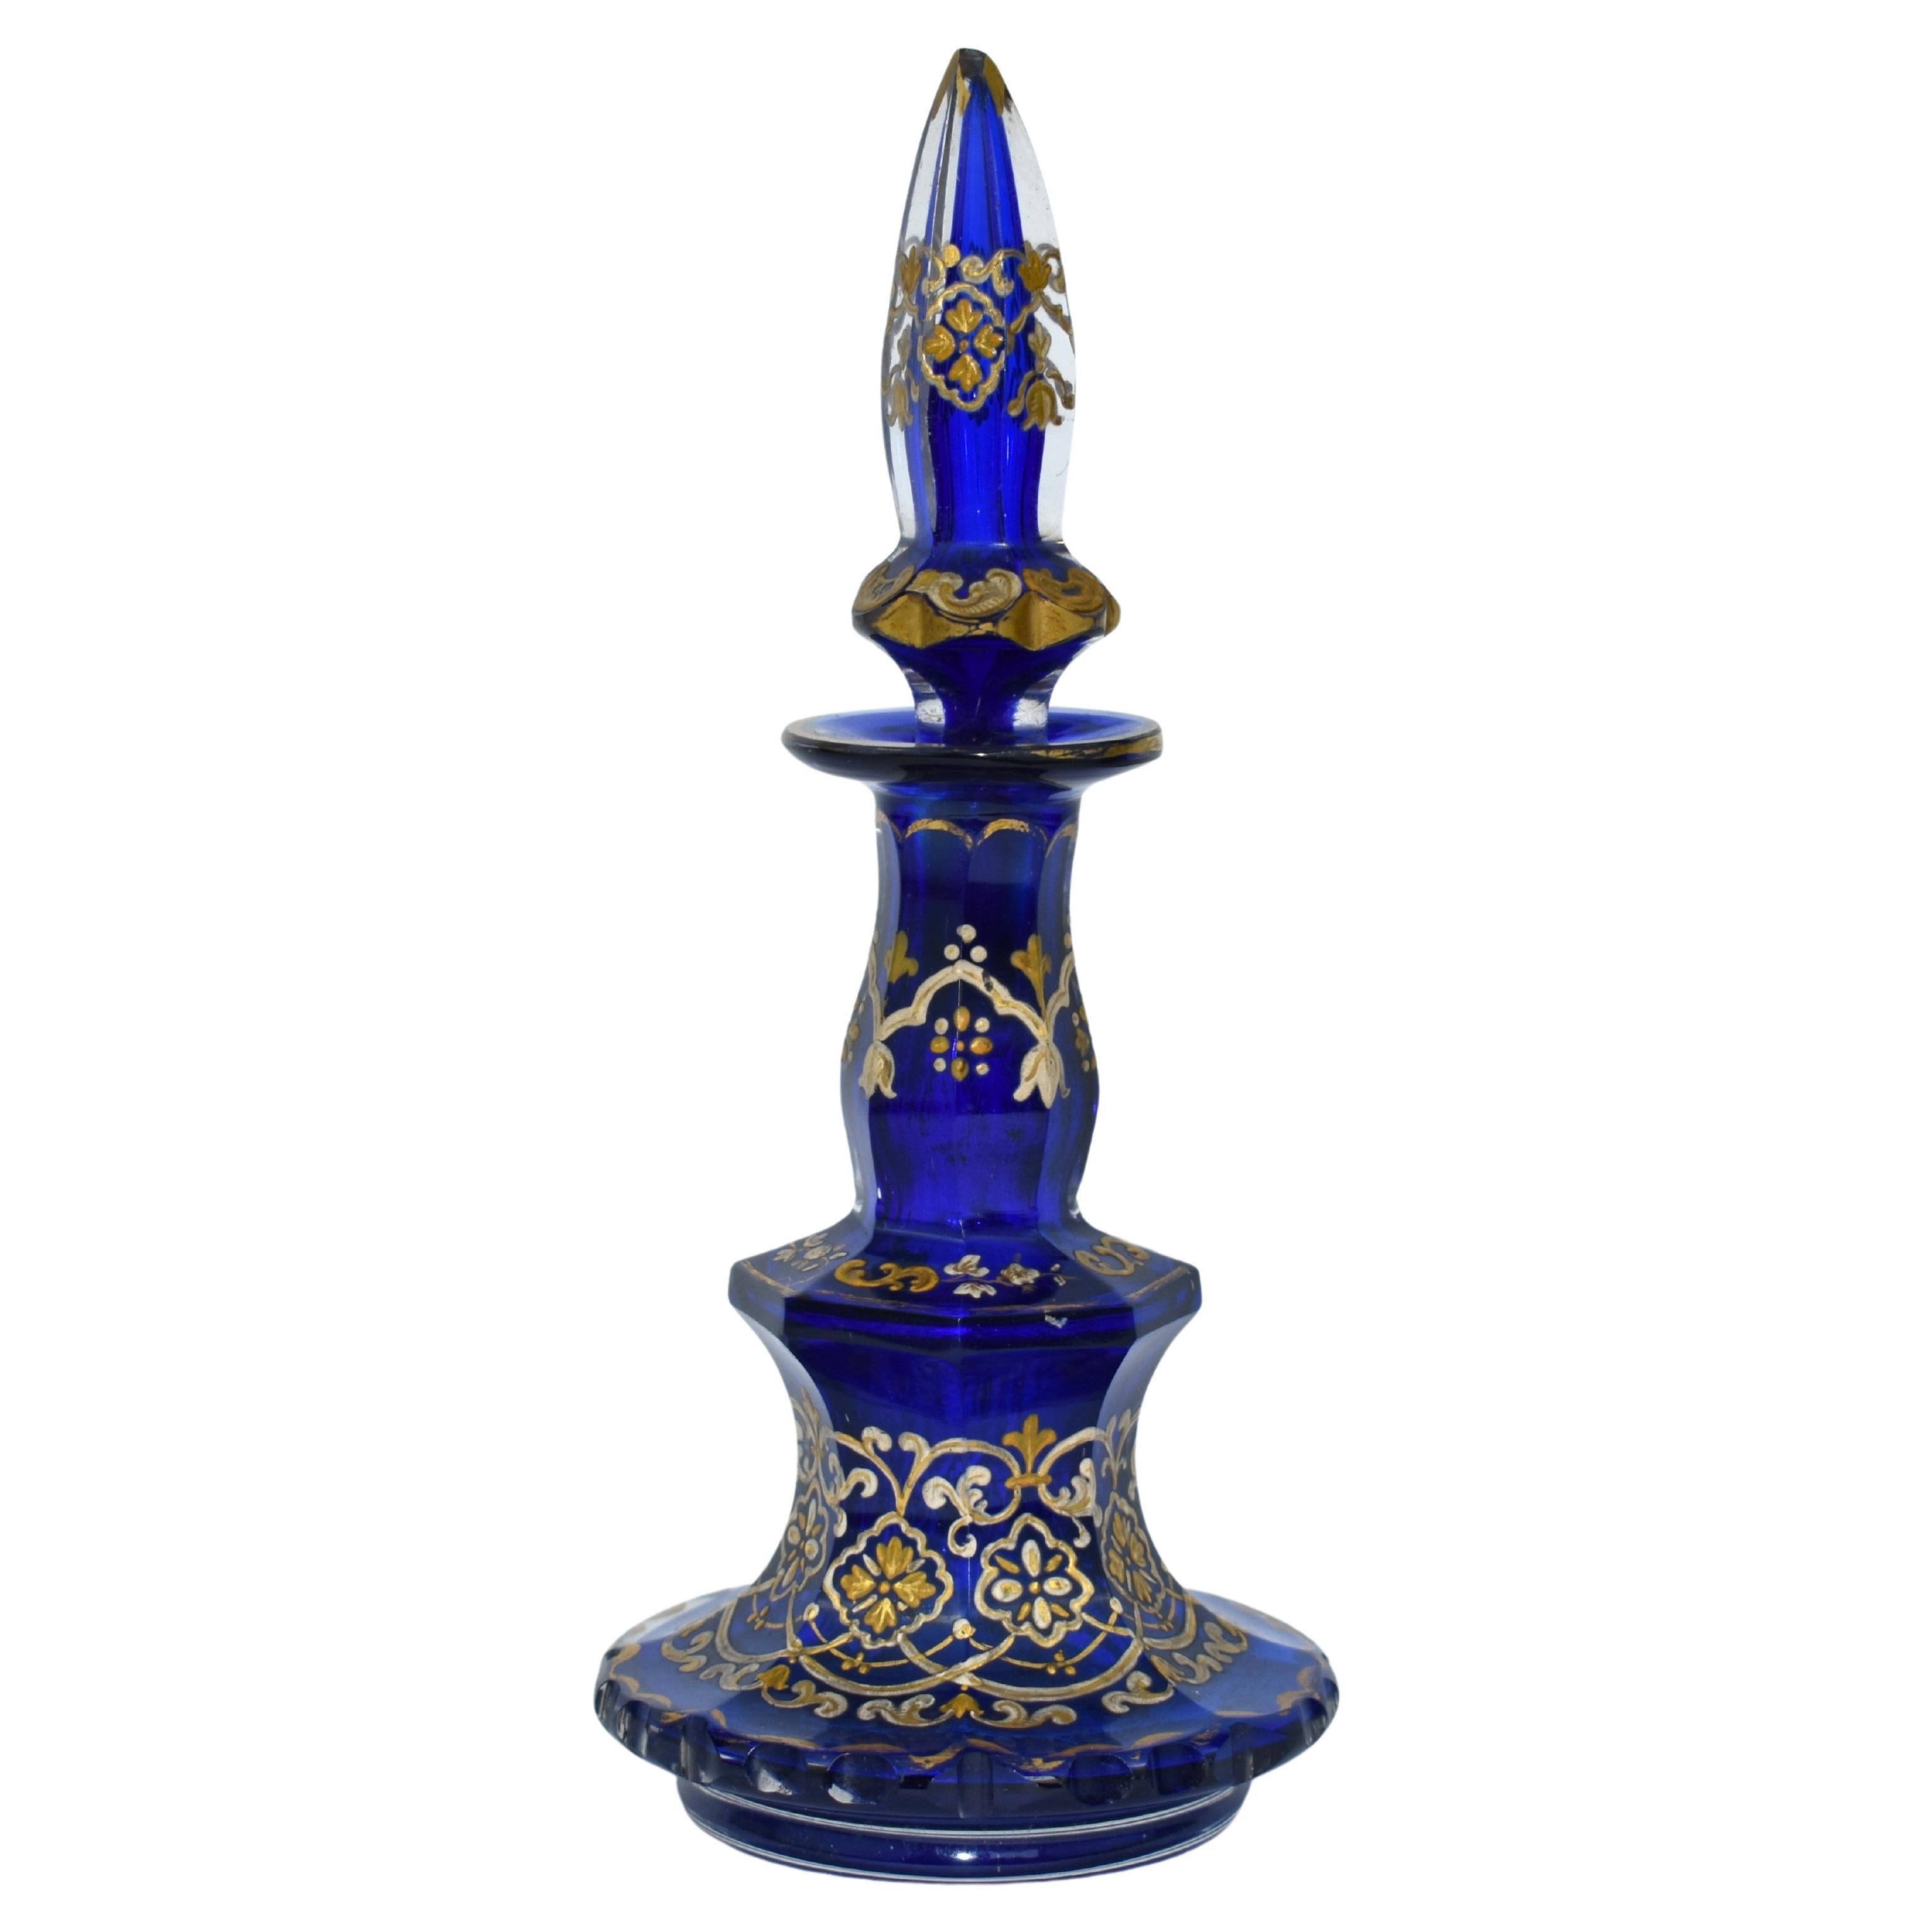 Brilliant Cobalt Blue Cut-Glass Decanter, Perfume Bottle from the Highest Quality Bohemian Glass Manufacture of the 19th Century

The body cut in multiple side panels and profusely Decorated with Gilded Enamel

Further enamelling on the neck and